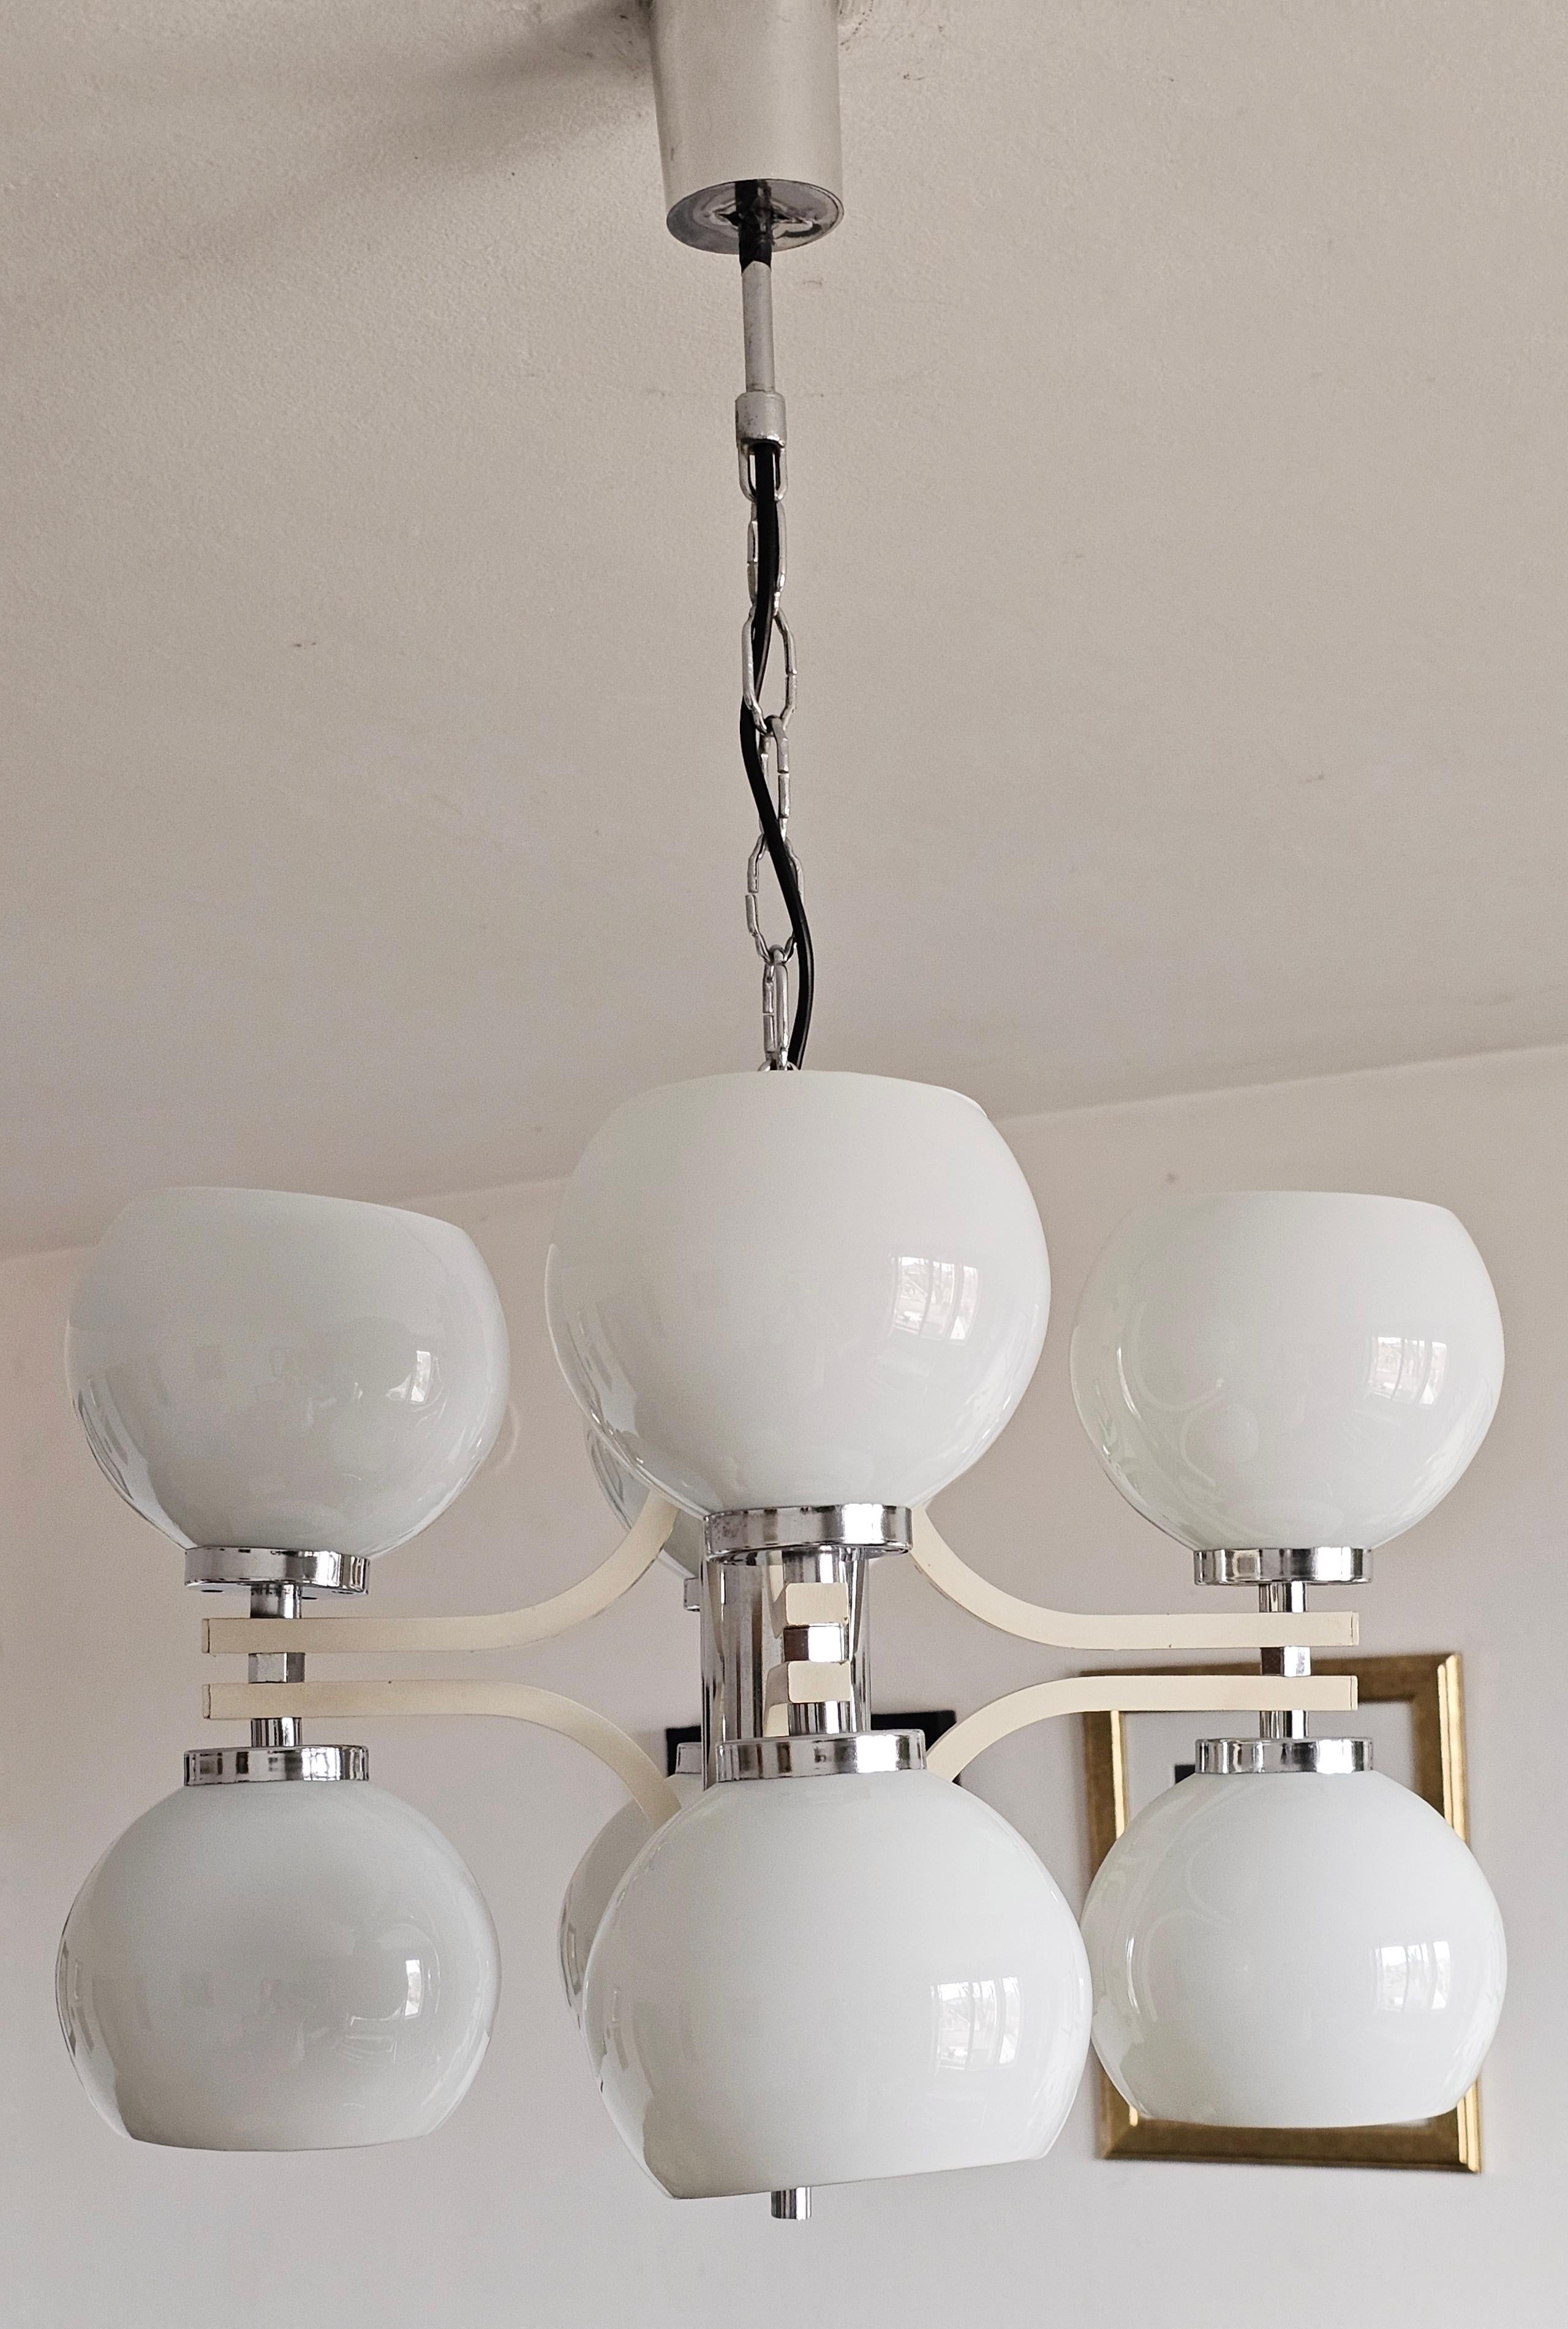 Space Age 8-Light Chandelier with While Glass Shades, Yugoslavia 1970s For Sale 5